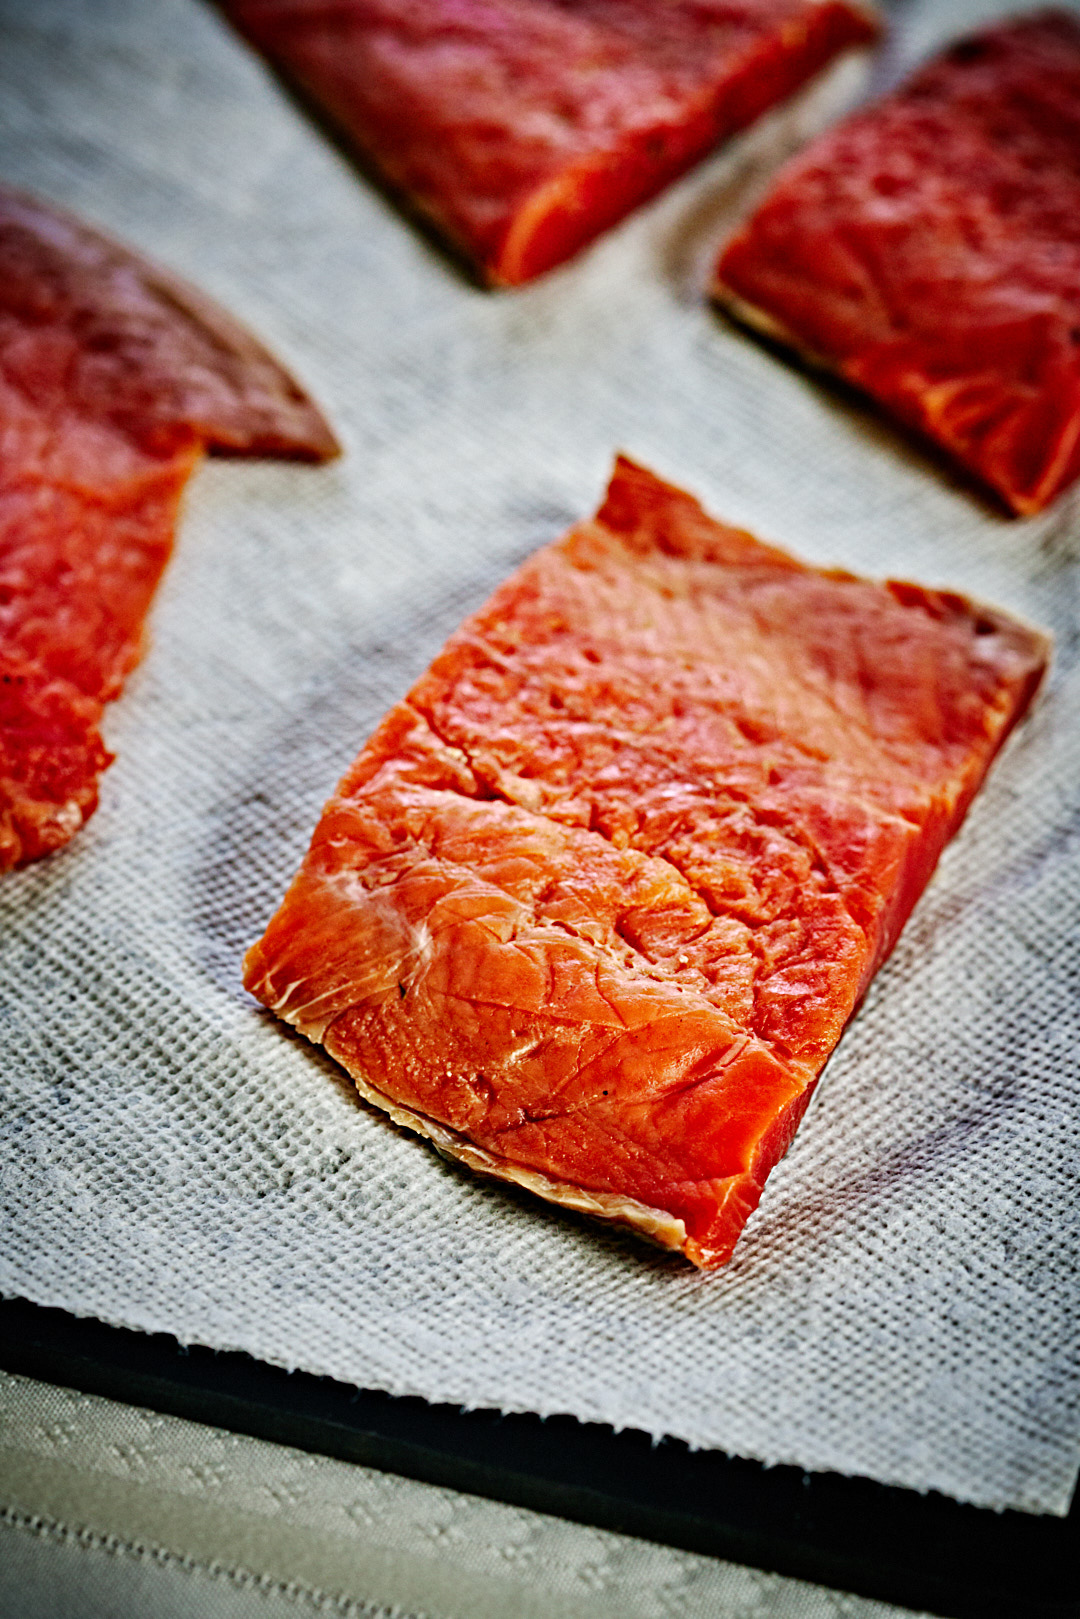 Plain cured salmon fillets resting on a gray tea towel.